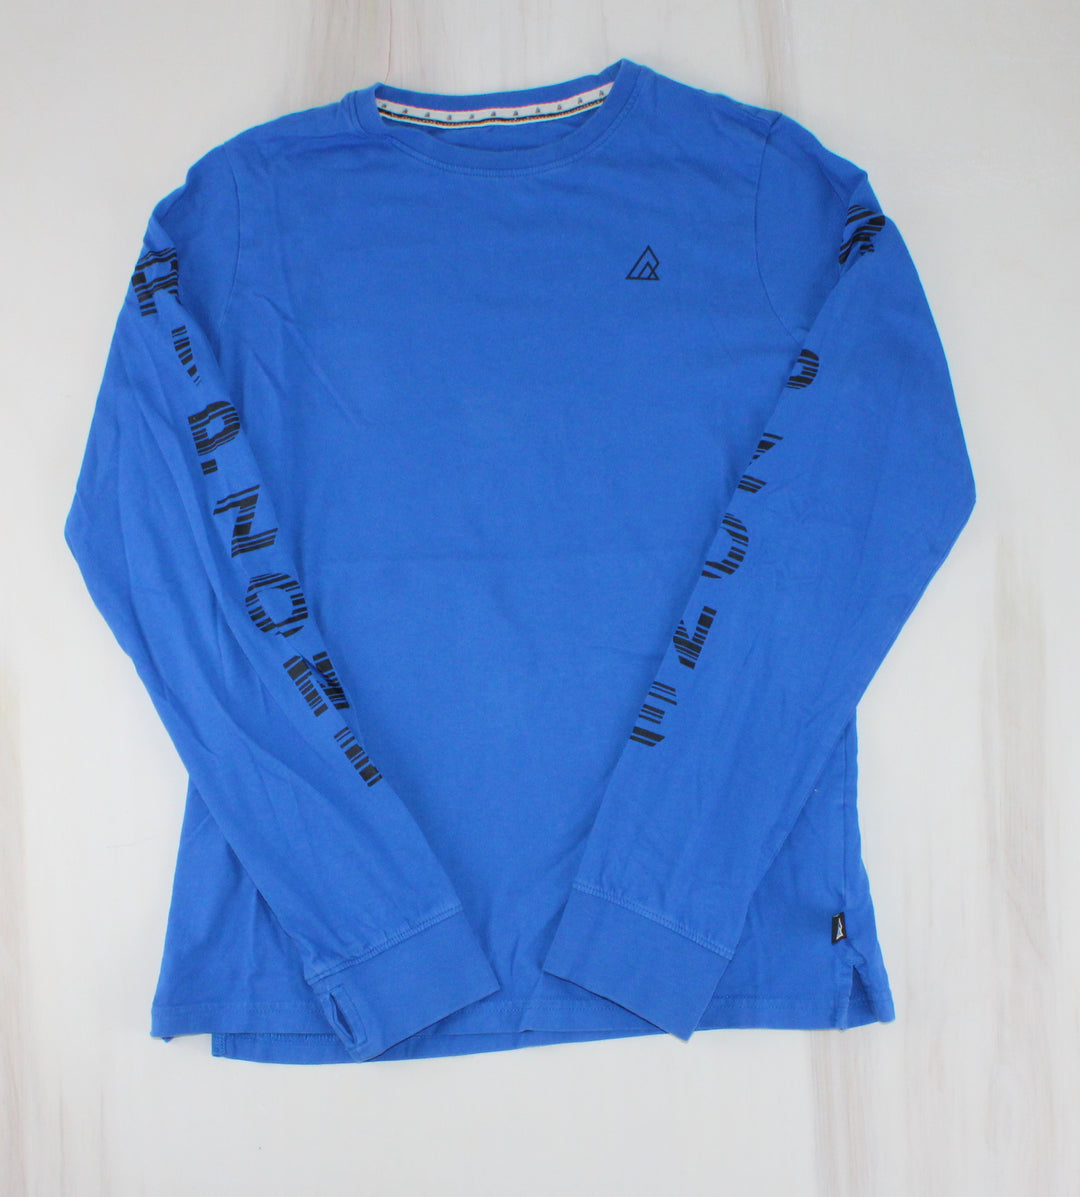 RIPZONE BLUE LONG SLEEVE TOP YLG EUC